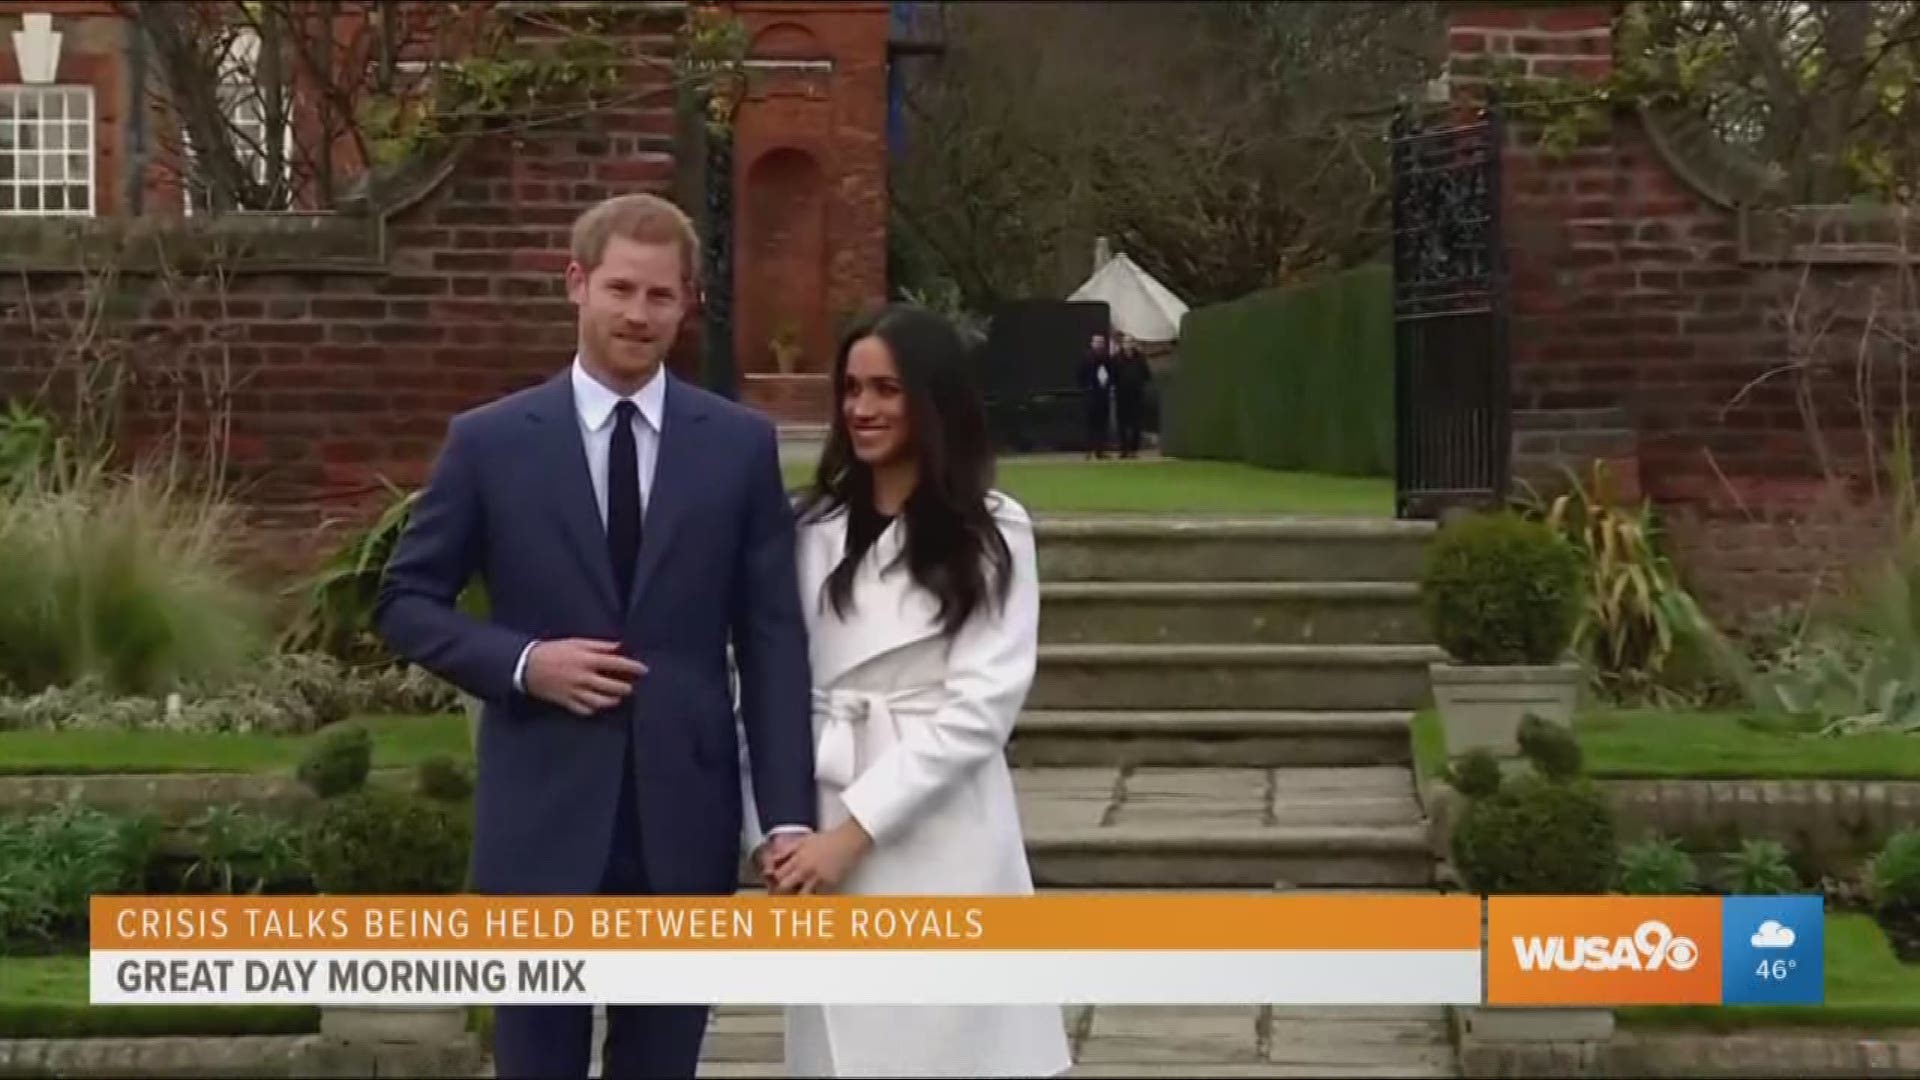 For our morning mix series, we give you the rundown on the latest news. This morning, we chat about Prince Harry and Meghan Markle leaving senior royal status.